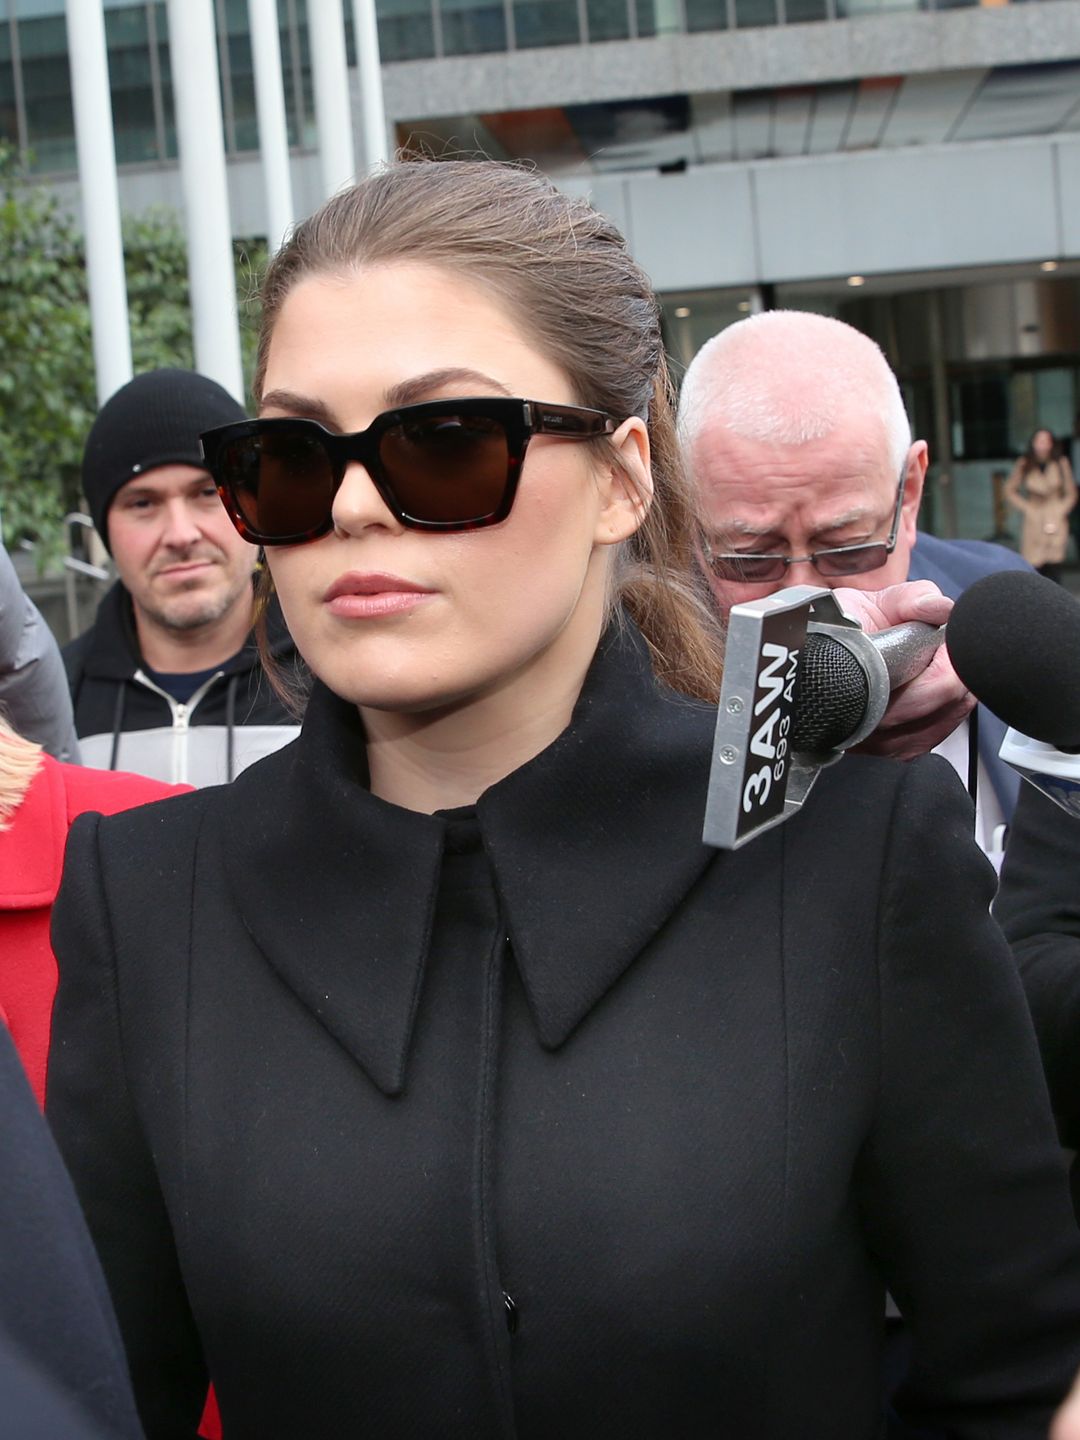 Belle Gibson (centre) leaves the Federal Court in Melbourne, Thursday, June 20, 2019